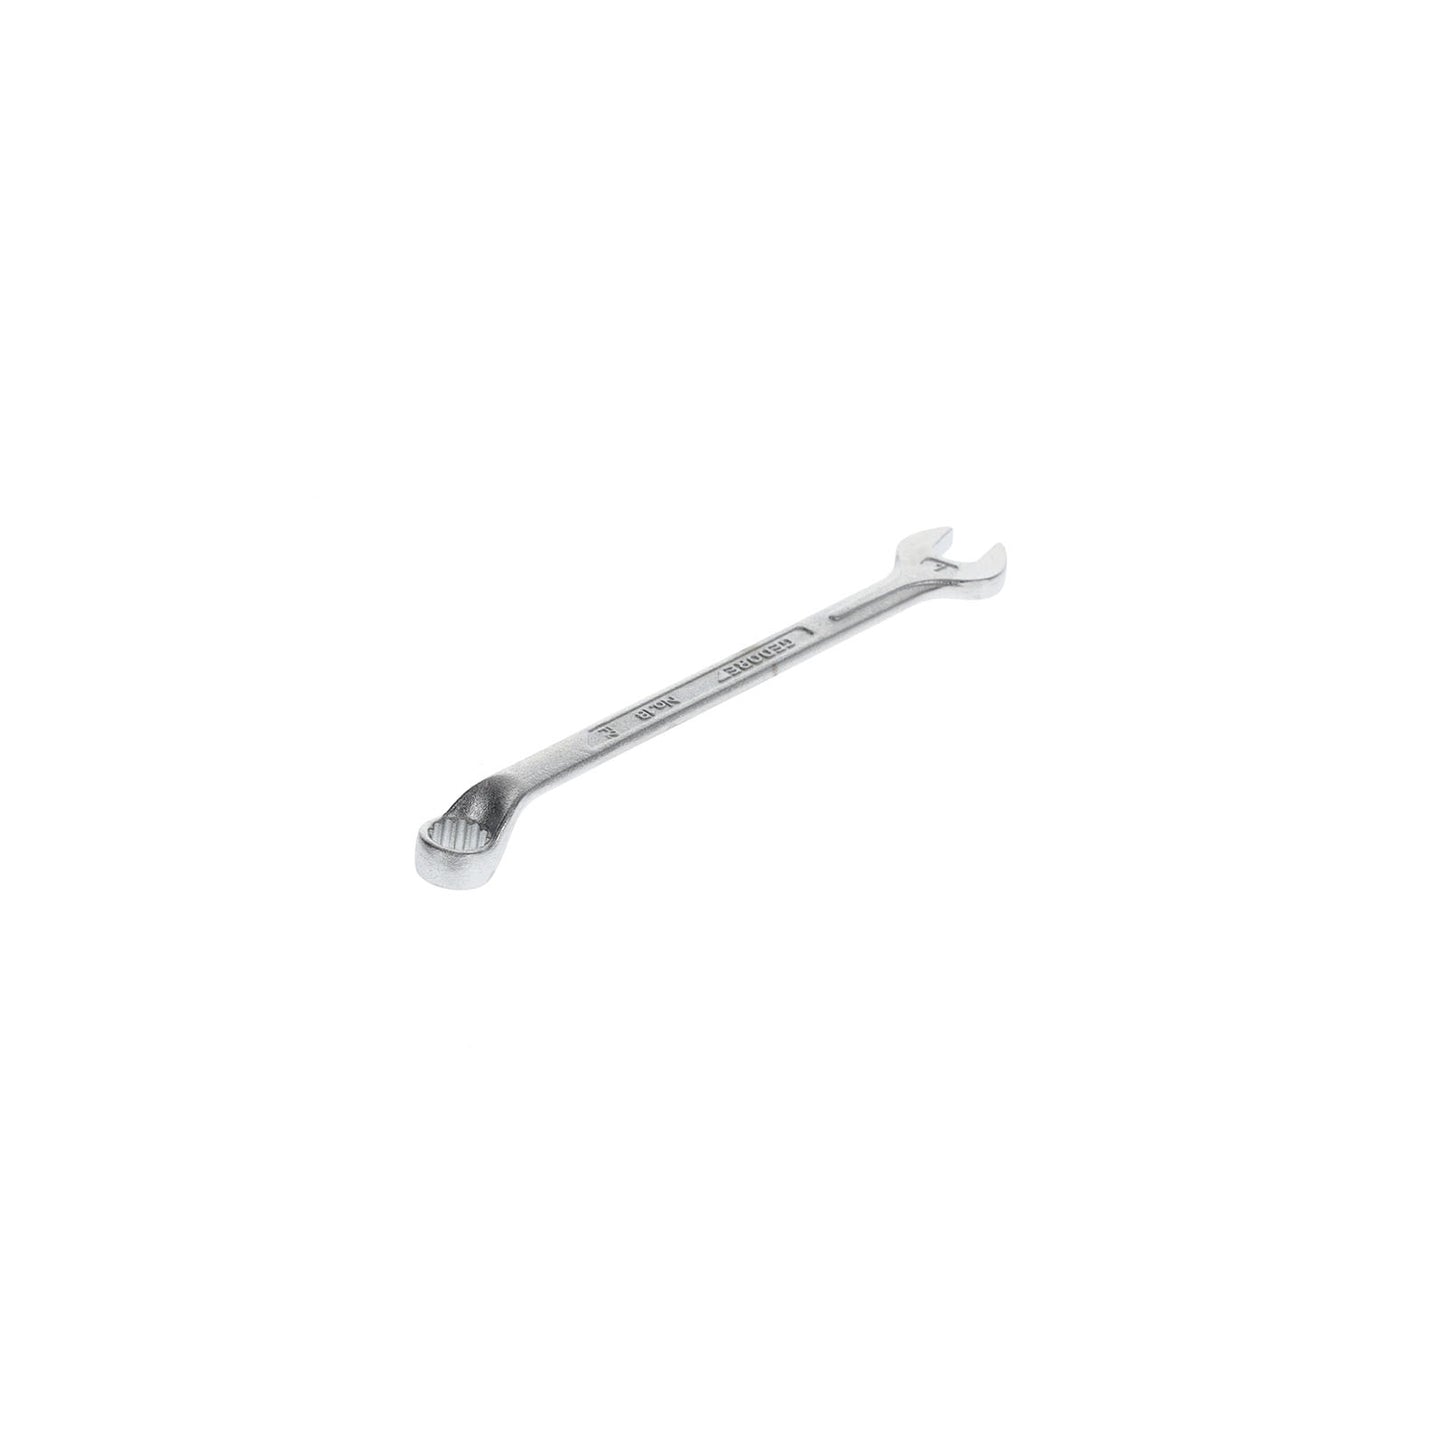 GEDORE 1 B 7 - Offset Combination Wrench, 7mm (6000590)